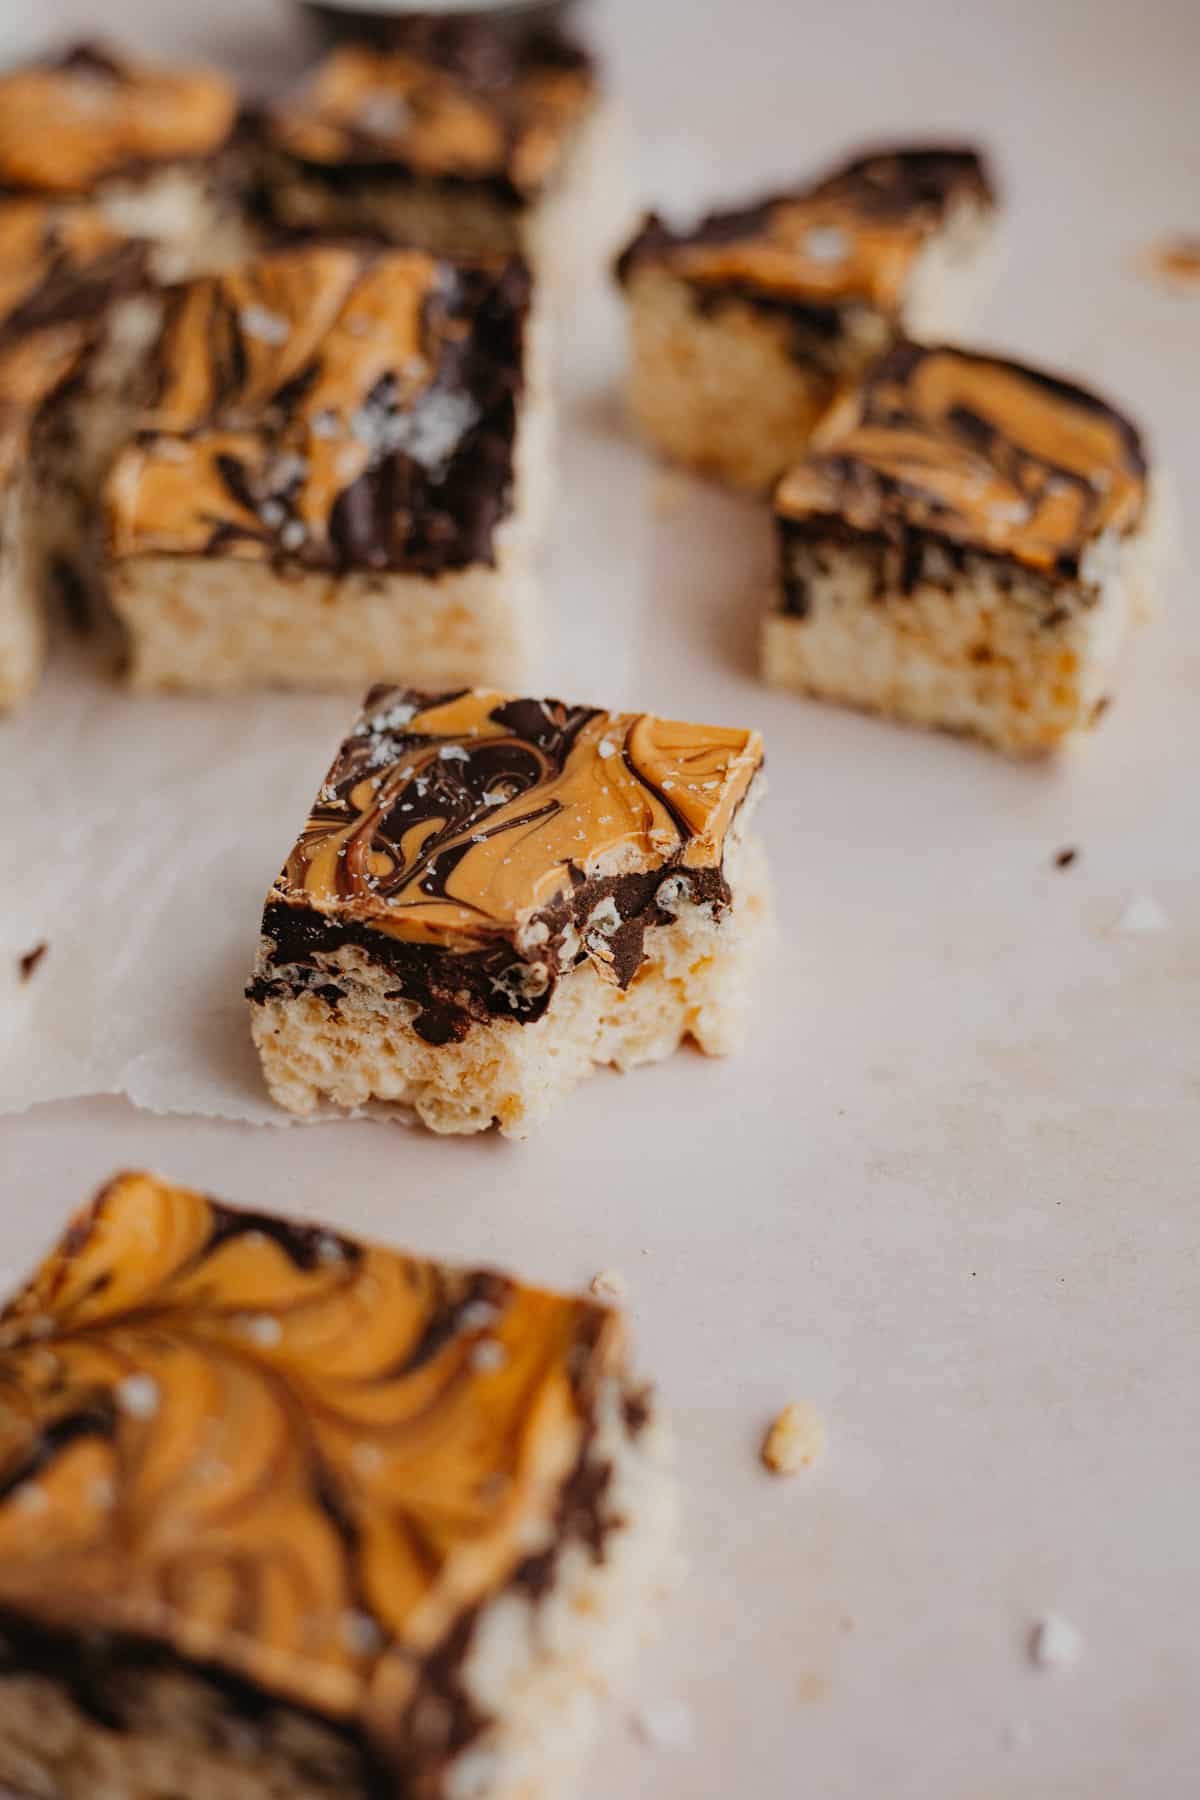 Several chocolate covered rice krispie treats cut into squares on parchment paper. One square has a bite taken out of it.